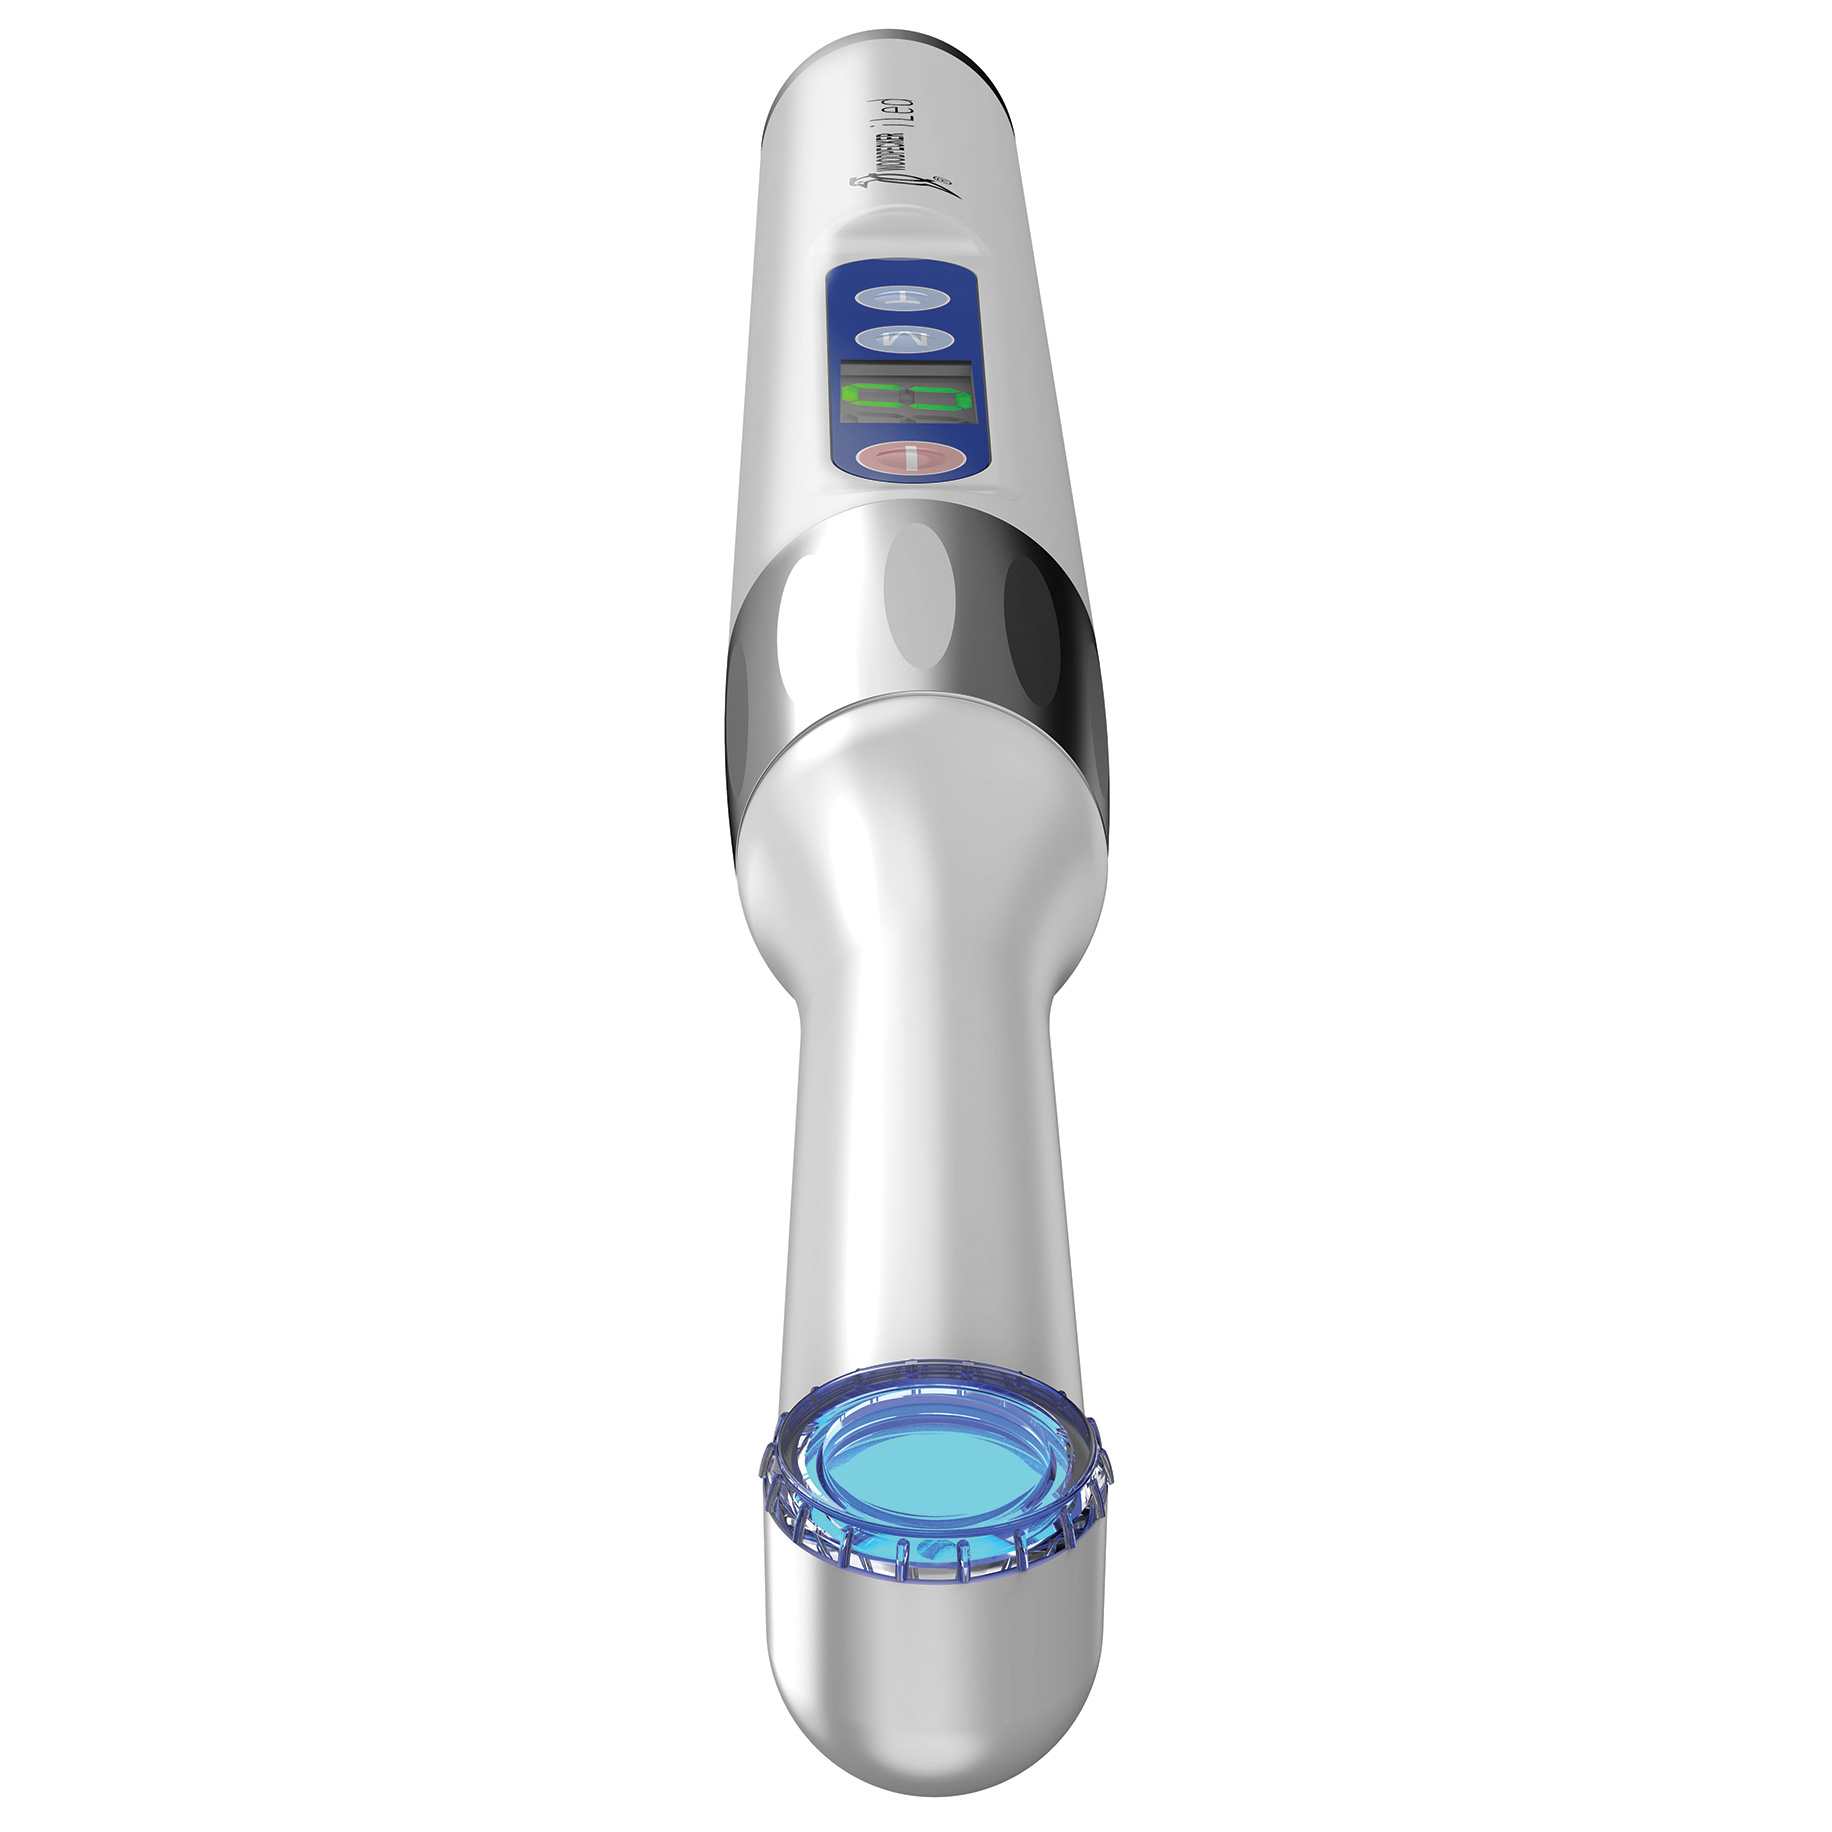 Woodpecker iLED Curing Light - White 